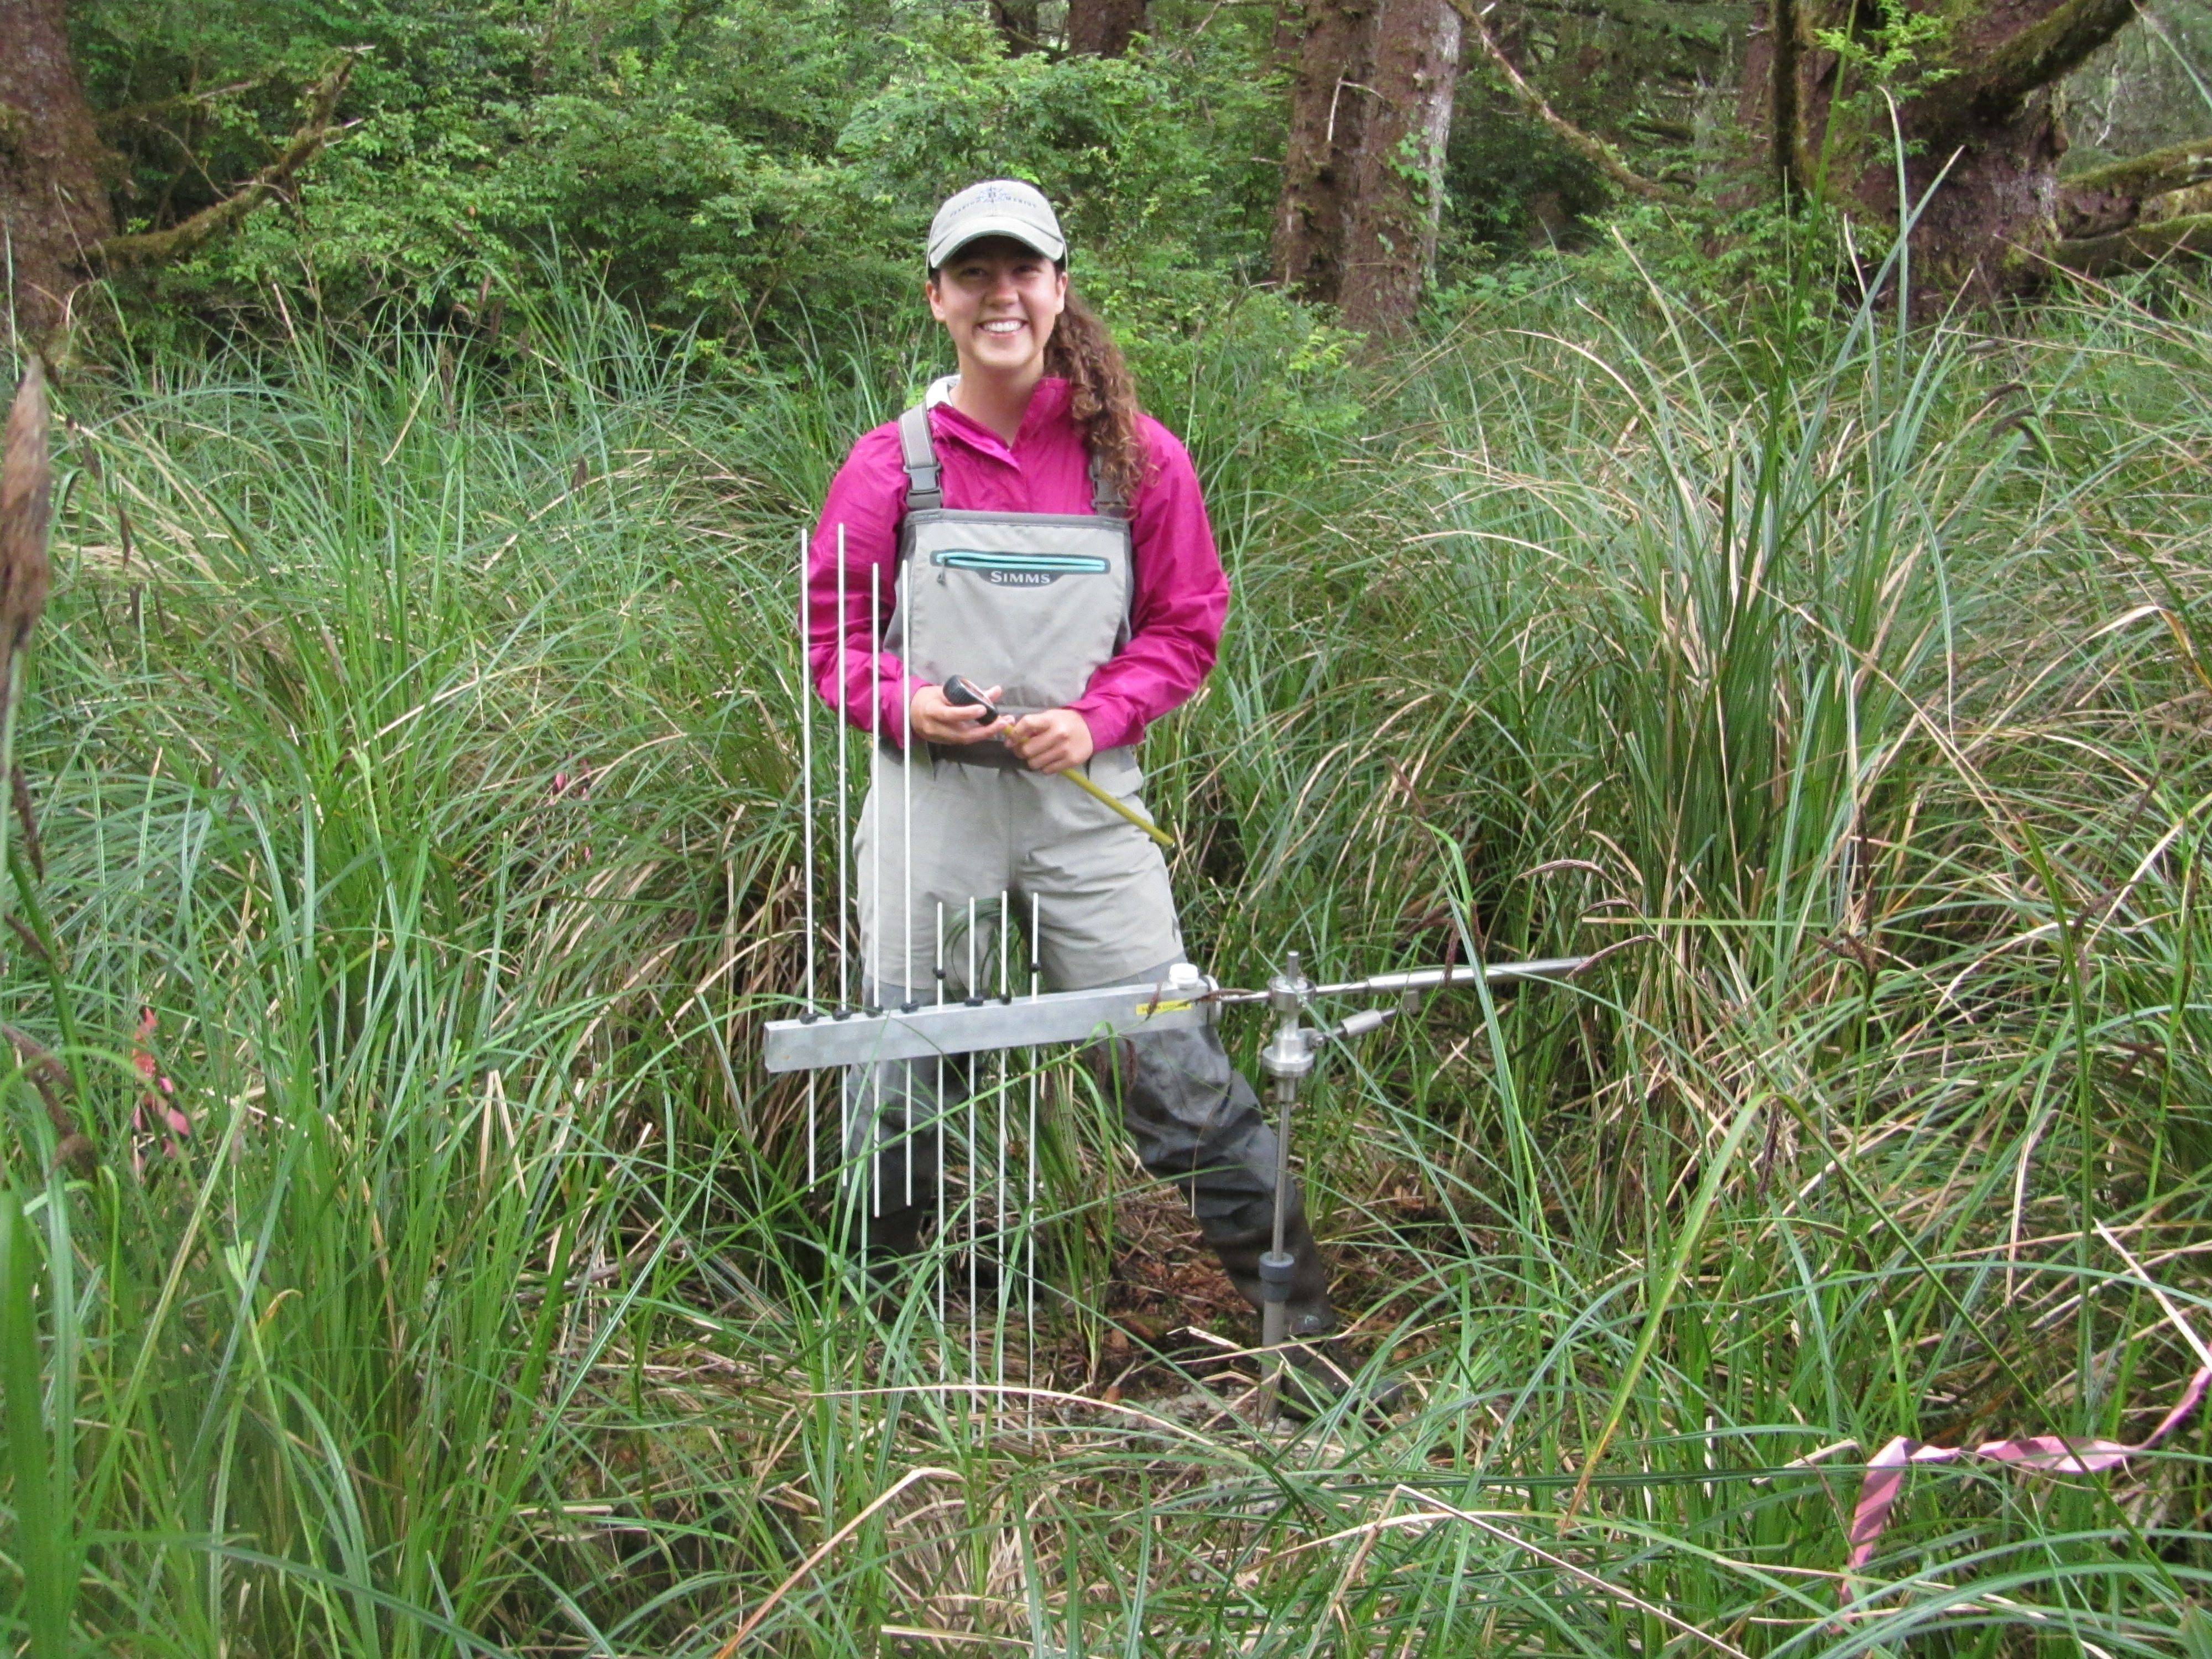 Amanda Ceroli, a 2017 NOAA Hollings Scholar, worked in Charleston, Oregon, with the South Slough National Estuarine Research Reserve for her Summer 2018 internship. Here she is conducting the base measurements for determining yearly sediment accretion in the NEER's newly obtained wetland site.